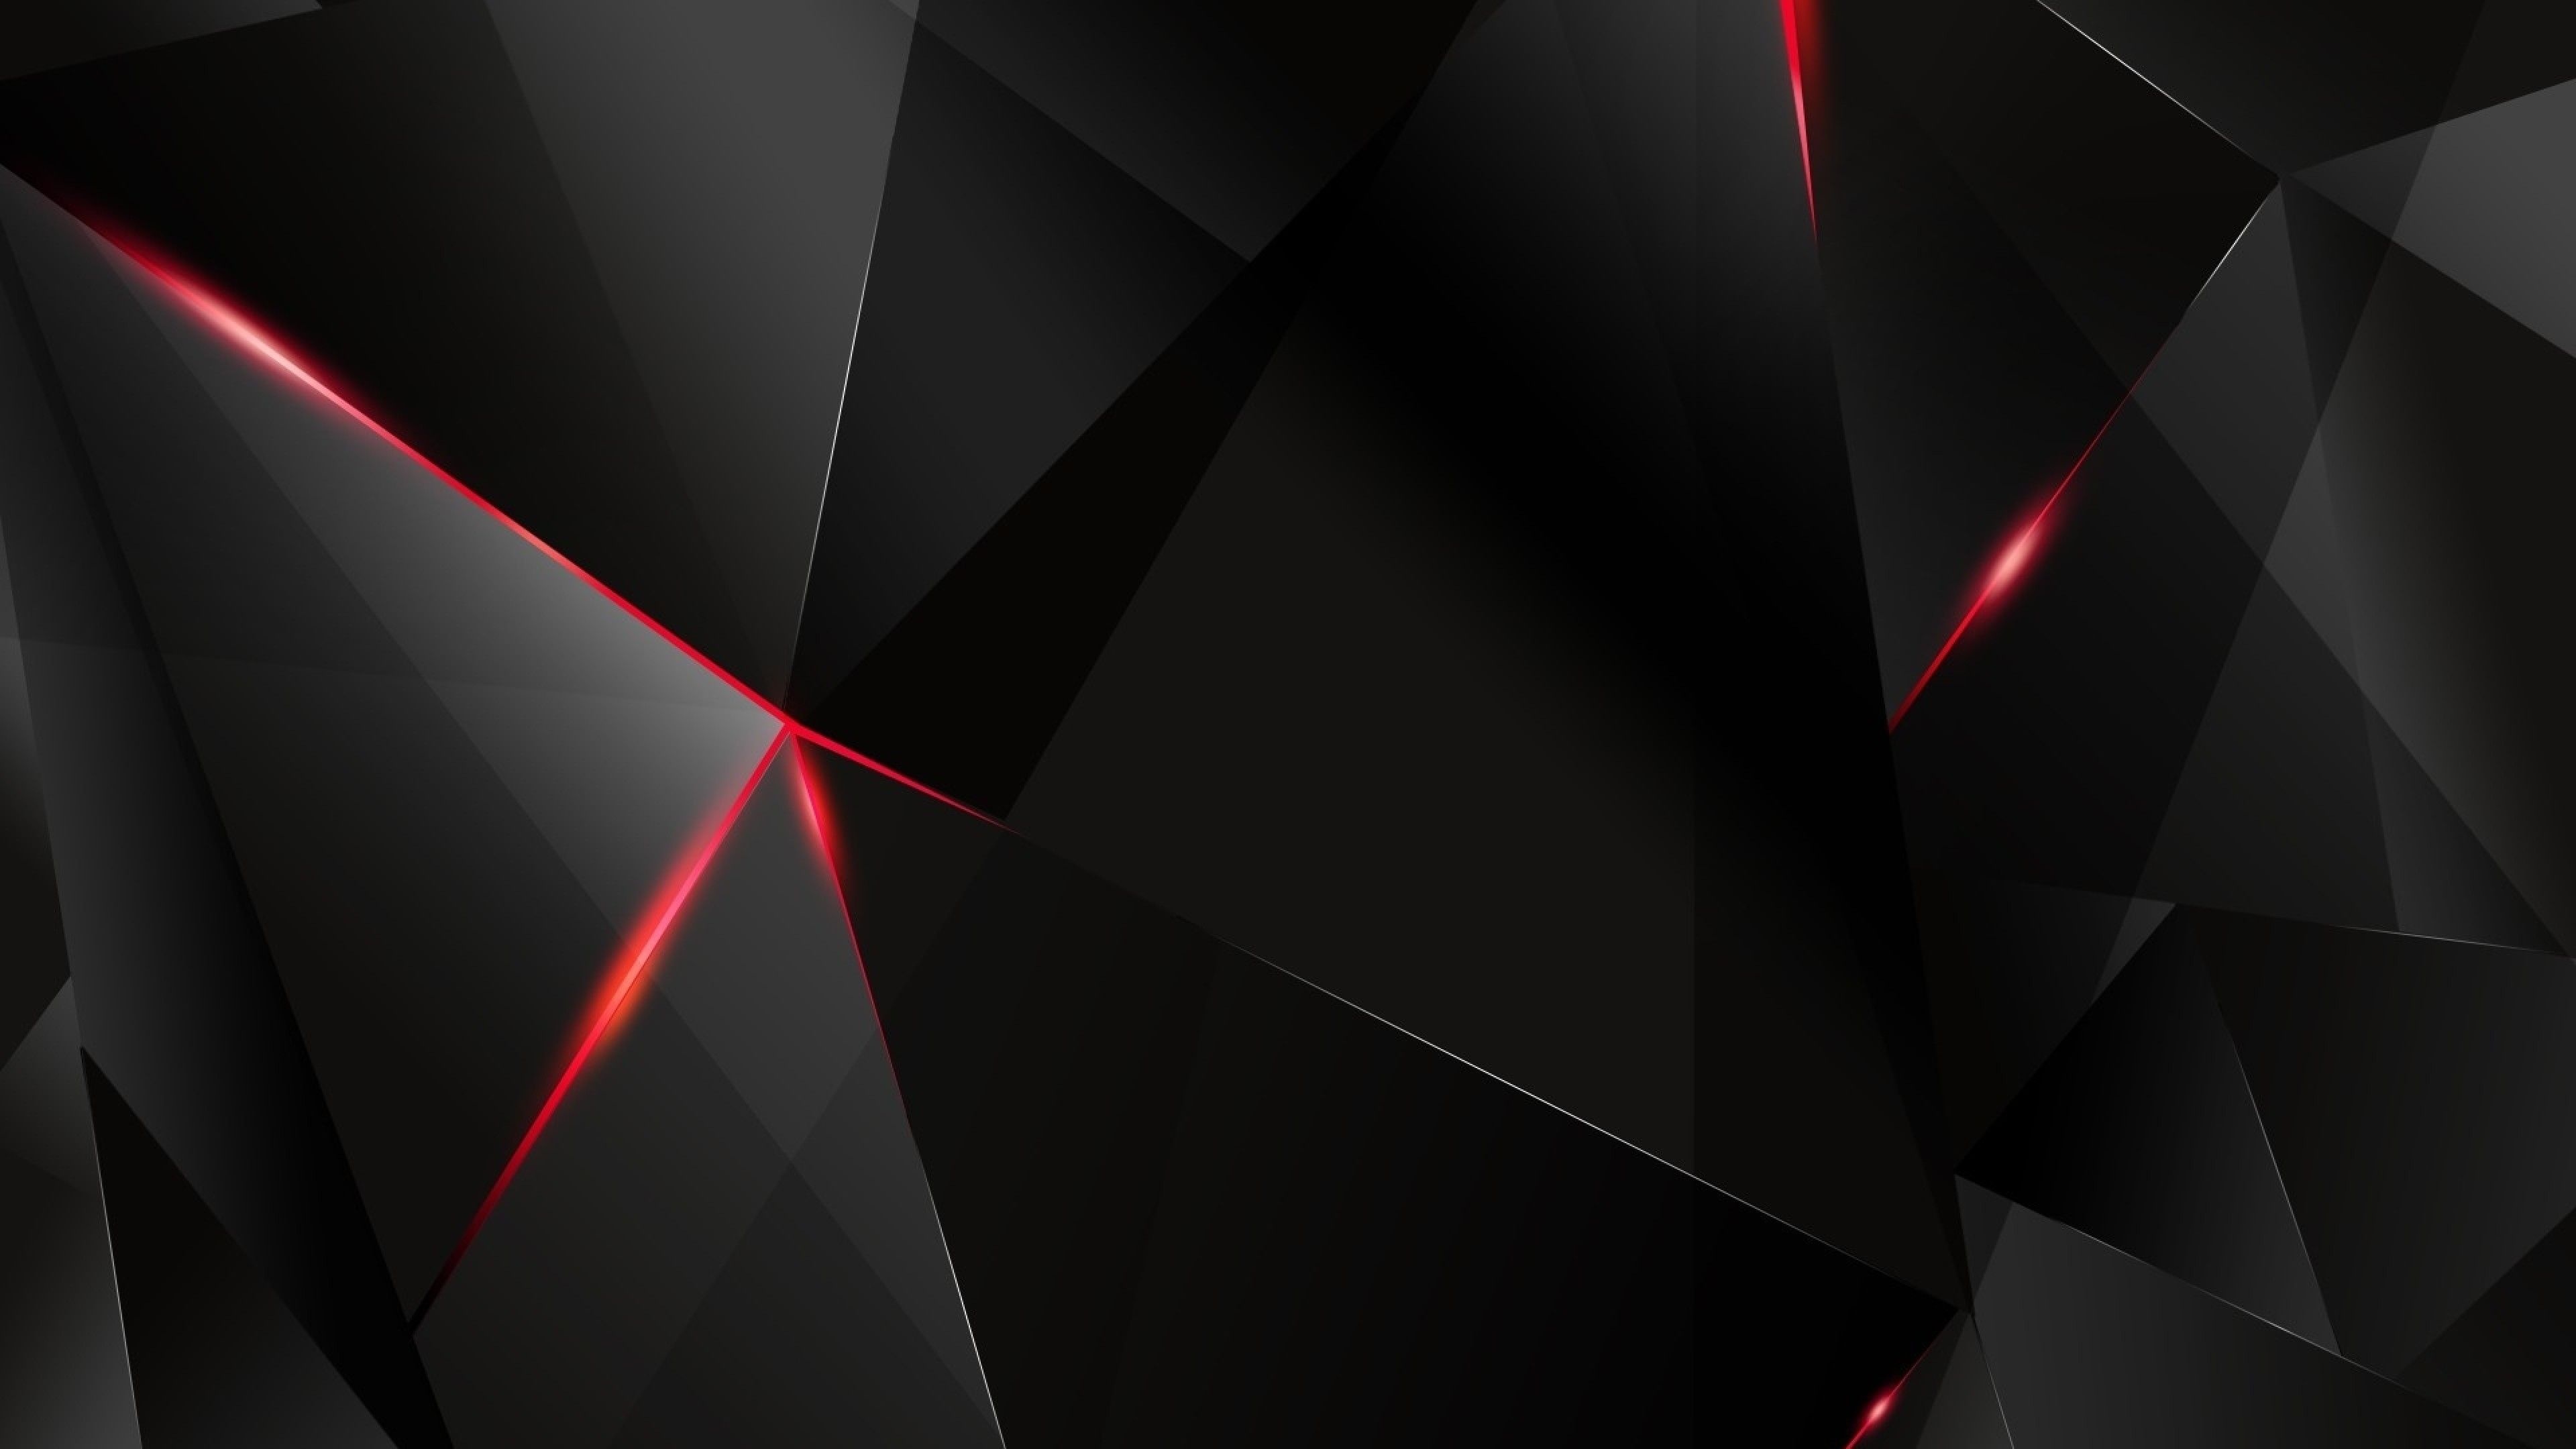 Backdrop: Complementary angles, Intersecting line segments, Dark, Triangles, Red lines. 3840x2160 4K Wallpaper.